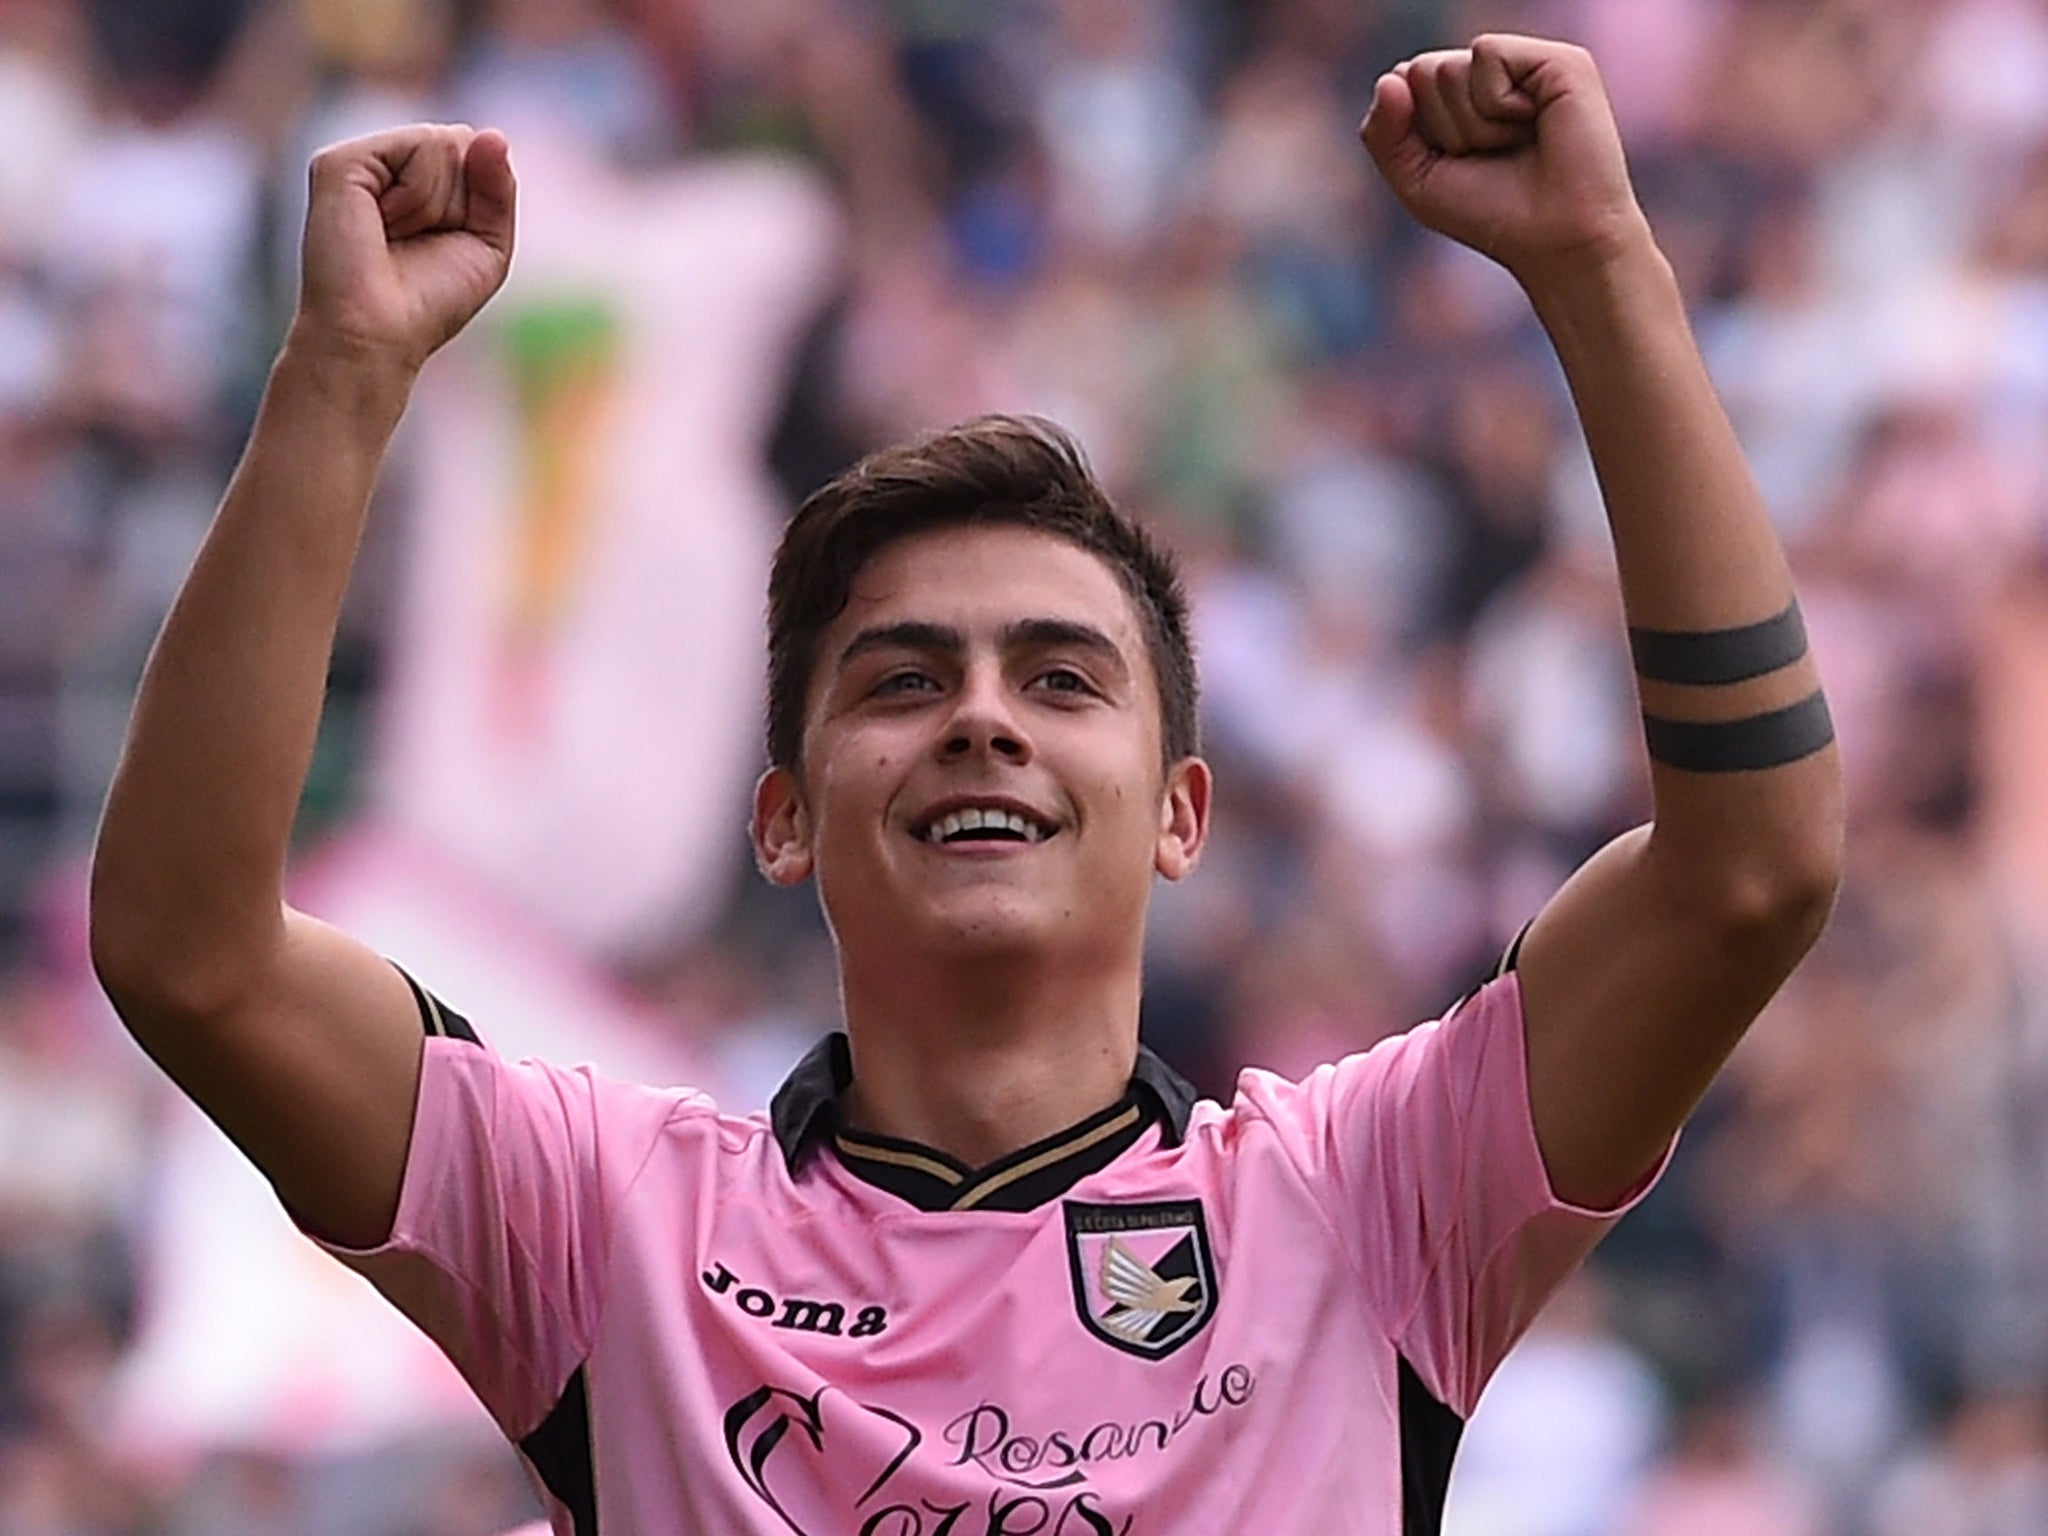 The Pallermo striker Paulo Dybala has been linked with Arsenal